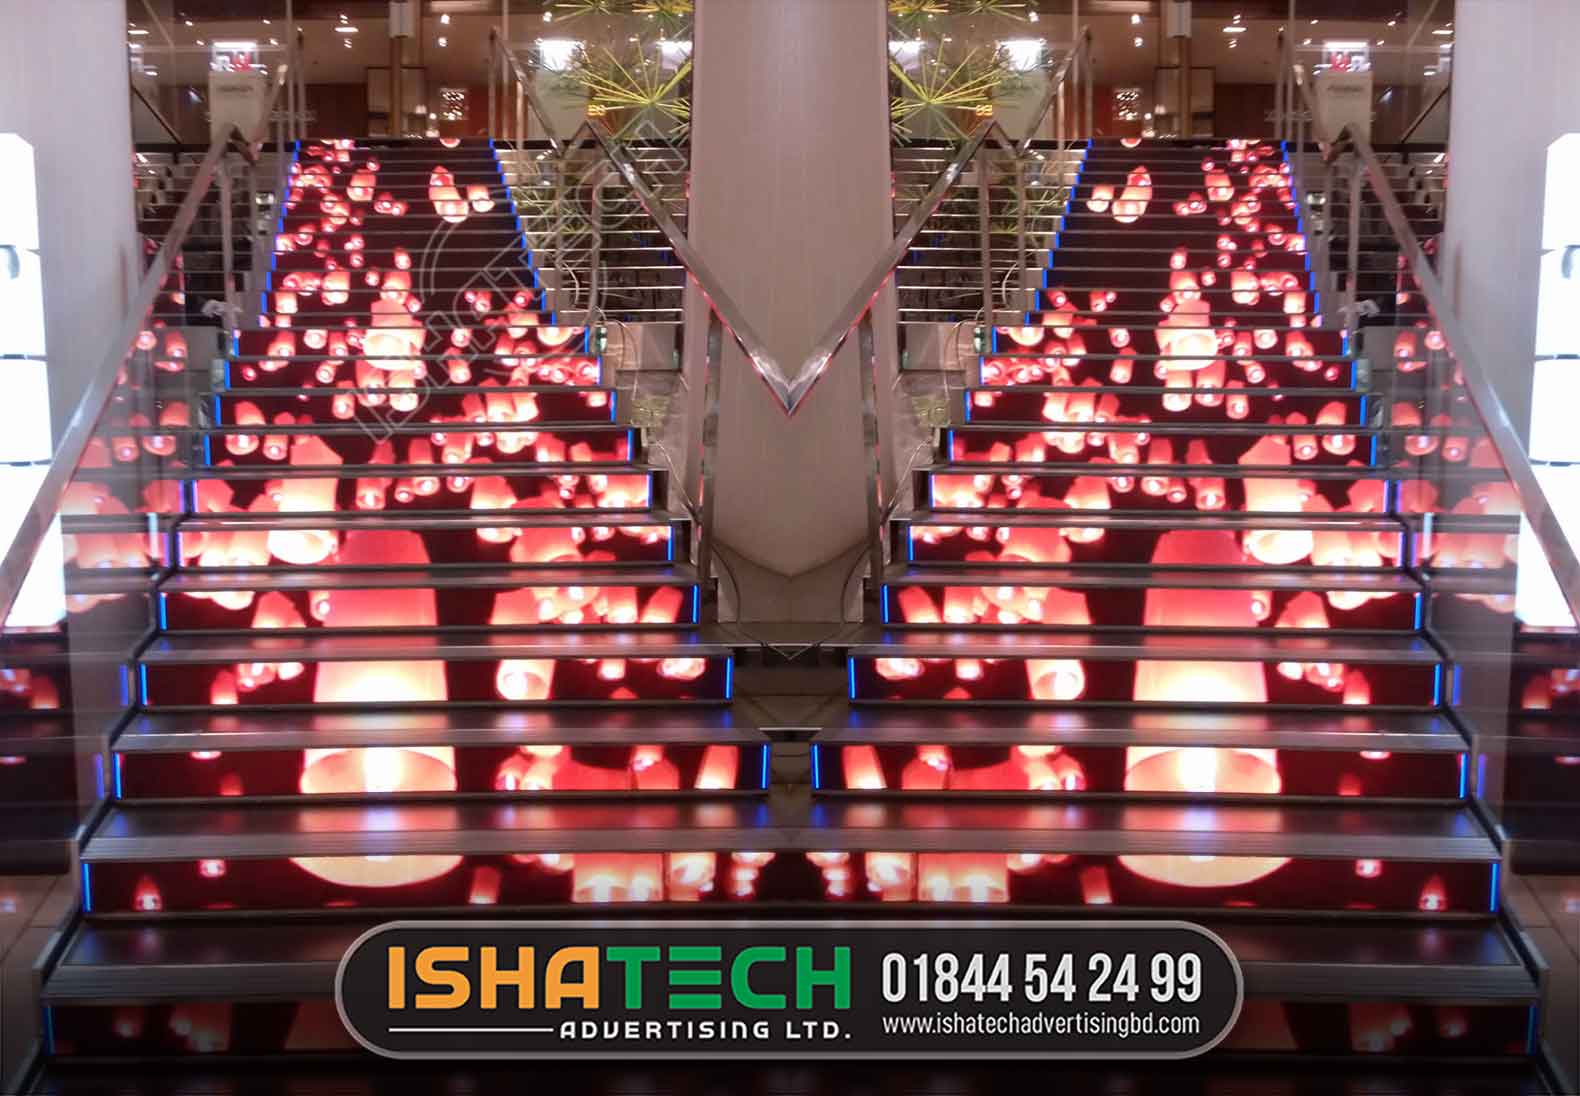 Description of Stair LED Video Display Stair LED Display is specially designed for stages, bars, shopping malls and other public places. High refresh rate and high gray scale make it more vivid, meeting the requirements of high visual quality of commercial use. Stair LED screen adopts toughened glass design featuring high load bearing capacity and shock resistance. LED stair cabinet can bear the weight of up to 1.5 T every square meter. According to customers’ requirements and field environment, Shenzhen Apexls Optoelectronic is capable of providing the most appropriate stair LED display. Main Features 1, Convenient maintenance: Simple design, easy for installation, dismantle and maintenance. 2, Wide view angle: SMD 3 in 1, with large viewing angle, clear and smooth displaying effect, rich and soft colors. 3, Perfect effect: High gray processing capacity, high refresh frequency with better display effect. 4, Impact resistance: High abrasion resistance mask, can be directly trampled on the floor, no damage on the screen. 6, High toughness: We use strong and durable die casting aluminum structure for LED Stair Display, convenient for the transportation. 7, High protection: Full sealing design, and the Ingress protection up to IP68 8. Professional design: Our Stair LED Display uses special light-spot atomization treatment; completely avoid the water wave phenomenon. 9. Various display content: Stair LED Display can display video image, text, animation and others. 10, Long life-span: Stair LED Display has High corrosion resistance and good heat dissipation to make sure it has longer life span. 11. Various signal input supporting: Stair LED display adopts synchronization control system processing. It can accept DVI, VGA, HDMI, S-video, YUV and other input signals. It can not only play video, image-text and image synchronously but also show 2 D and 3 D animation, video, TV, VCD, DVD, live video program, etc. Model PH6, PH6.67, PH7.62, PH10 Parameter (size can be customized)